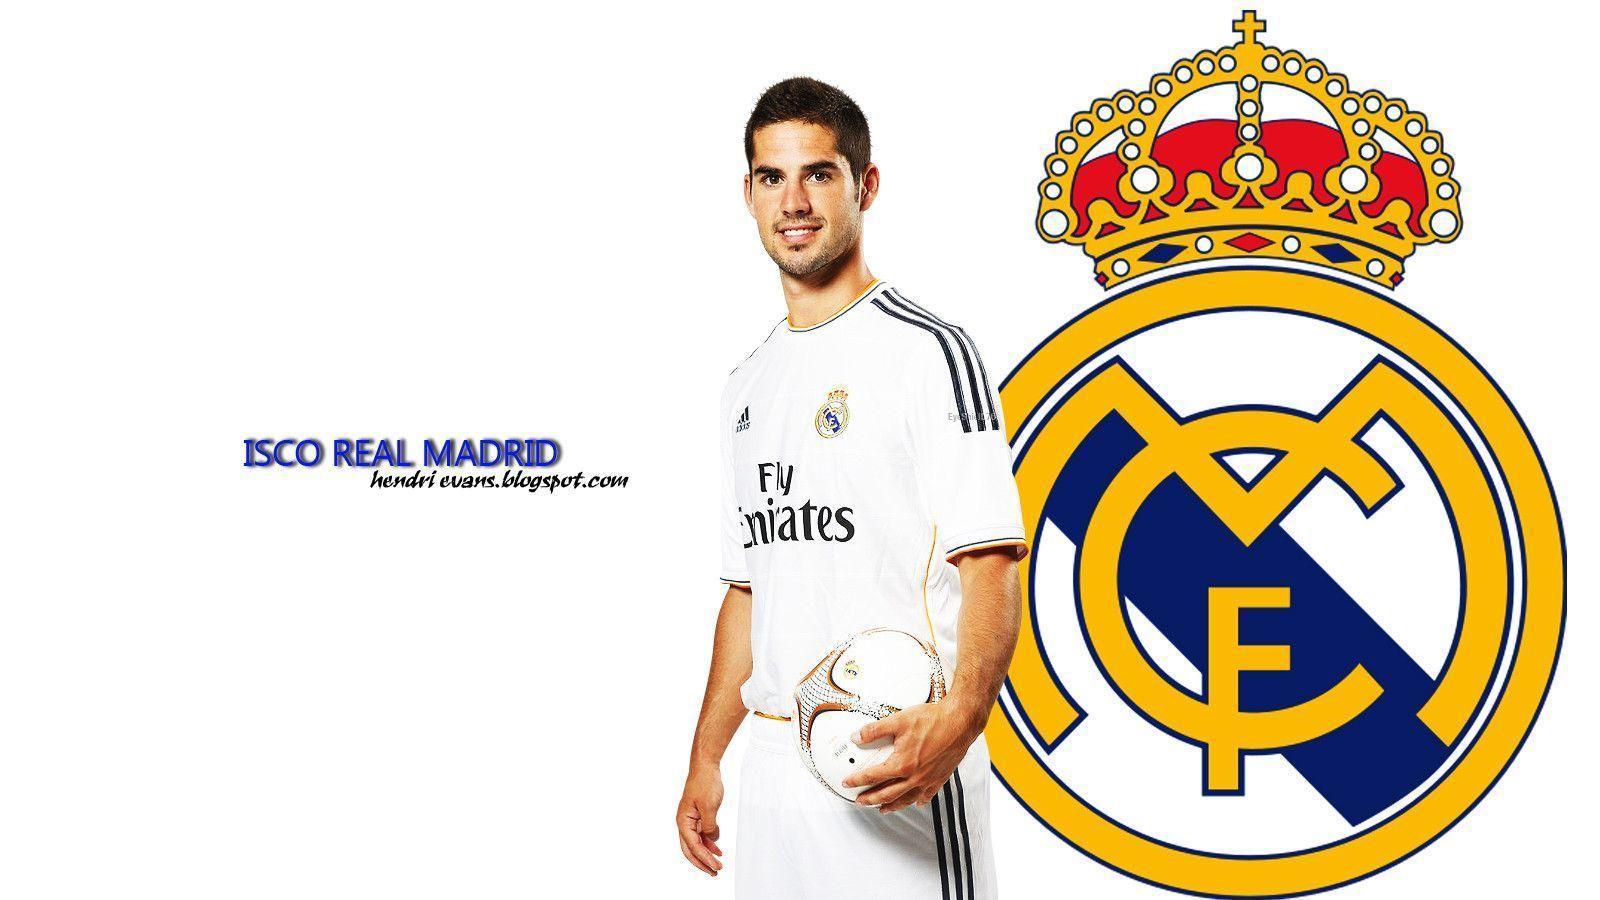 Isco with Real Madrid team logo image for wallpapers